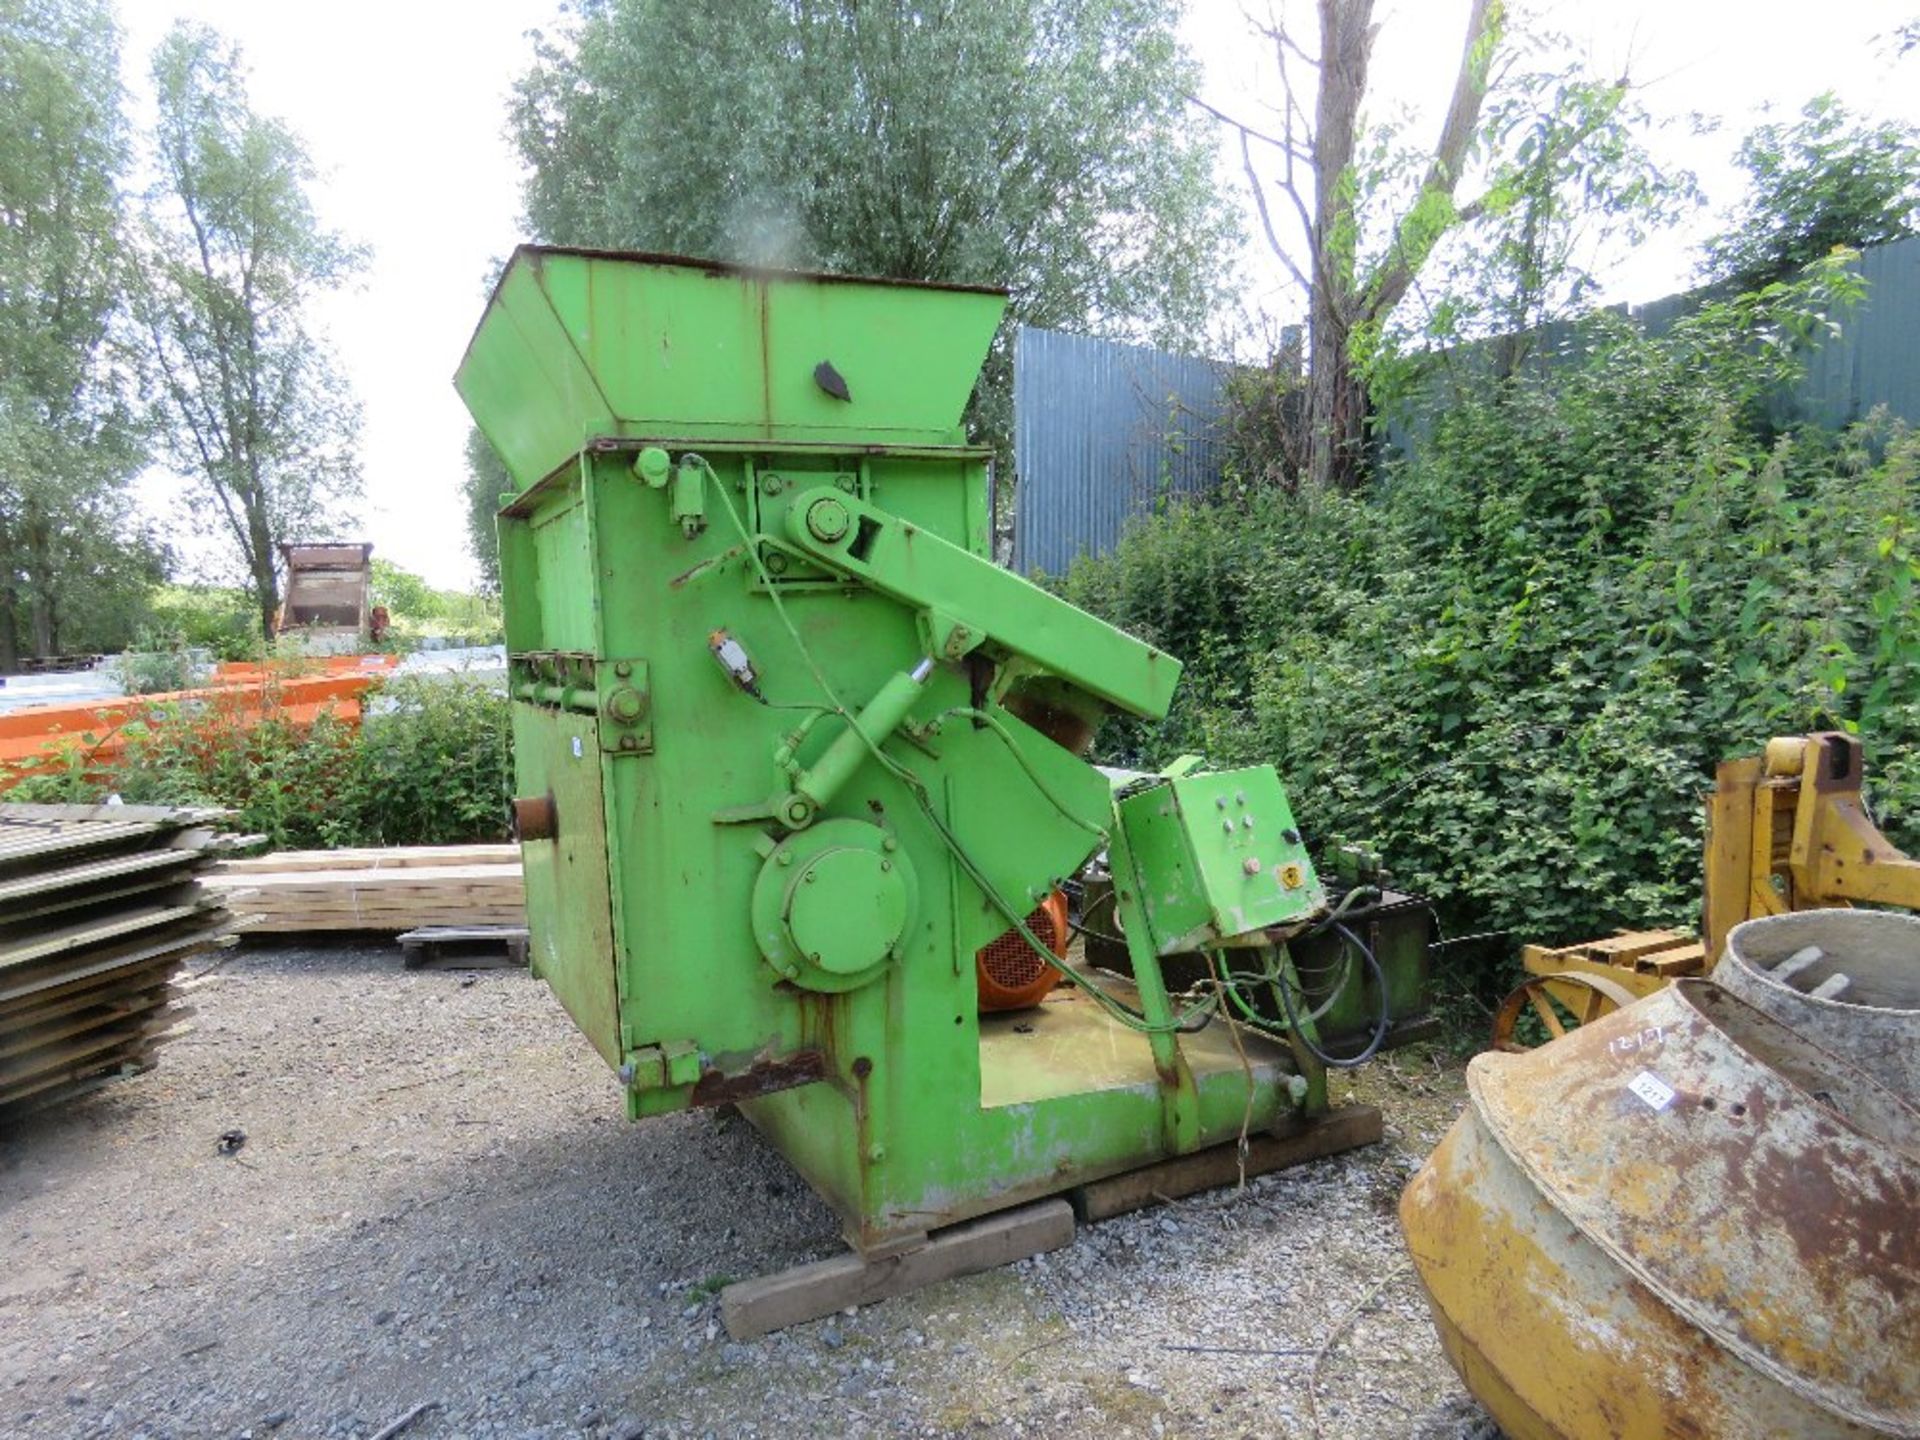 GREEN 3 PHASE SHREDDER UNIT, ABB MOTOR POWERED WITH HYDRAULIC POWER PACK.